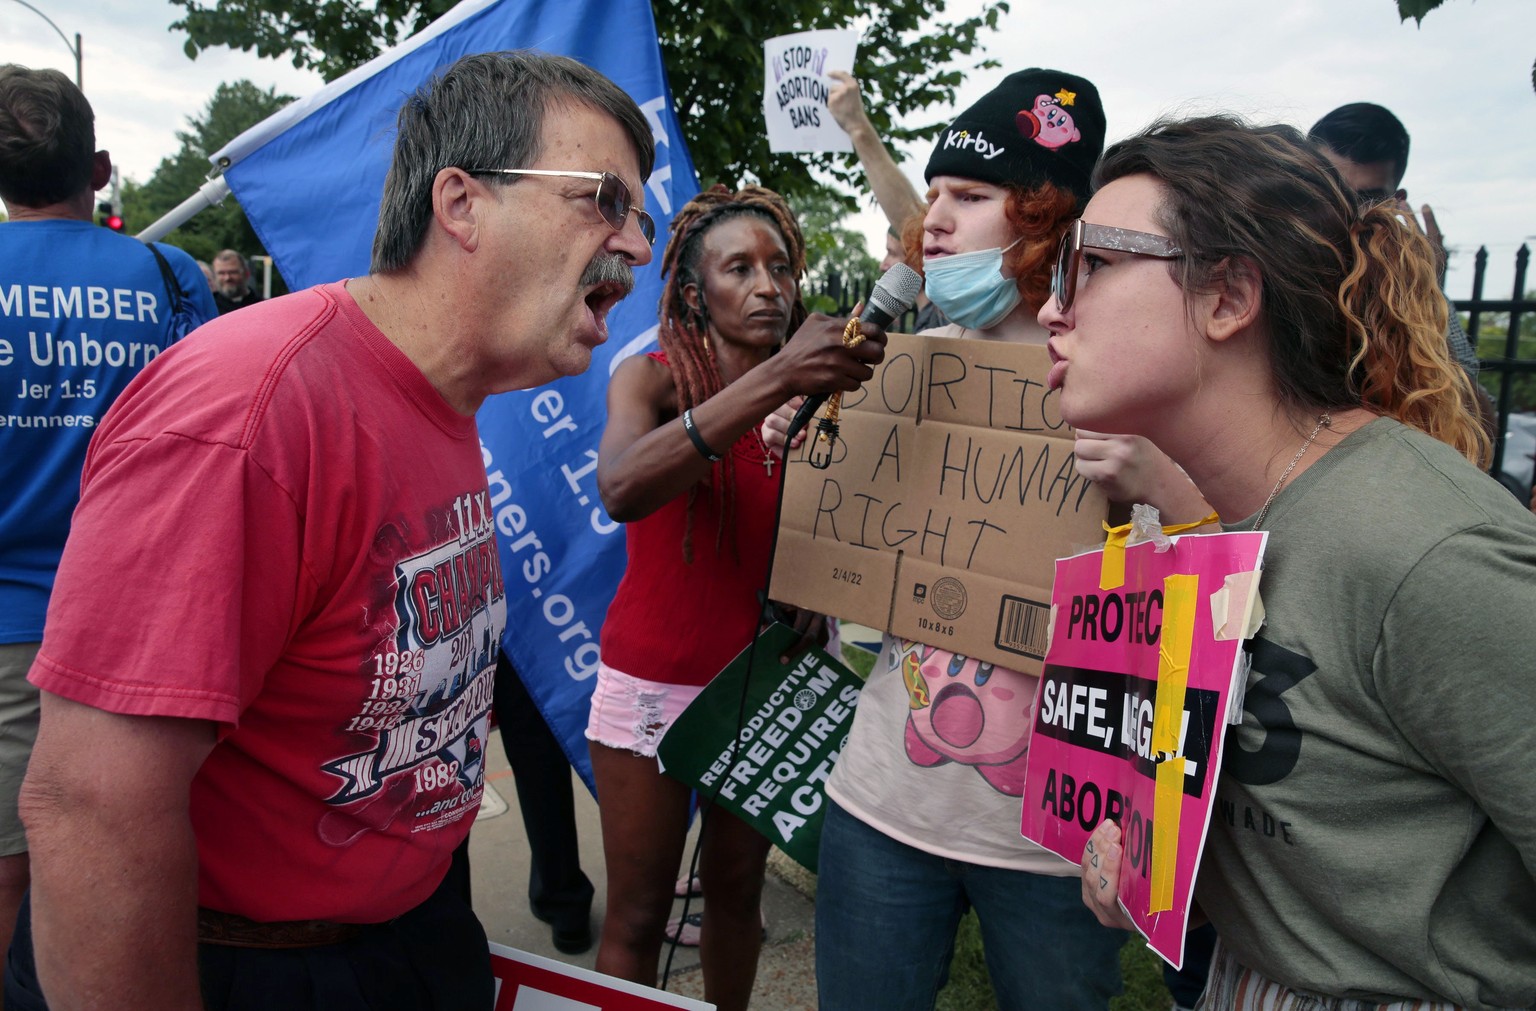 Steve Sallwasser of Arnold debates Brittany Nickens of Maplewood during competing rallies held outside Planned Parenthood of Missouri following the U.S. Supreme Court announcement overturning Roe v. W ...